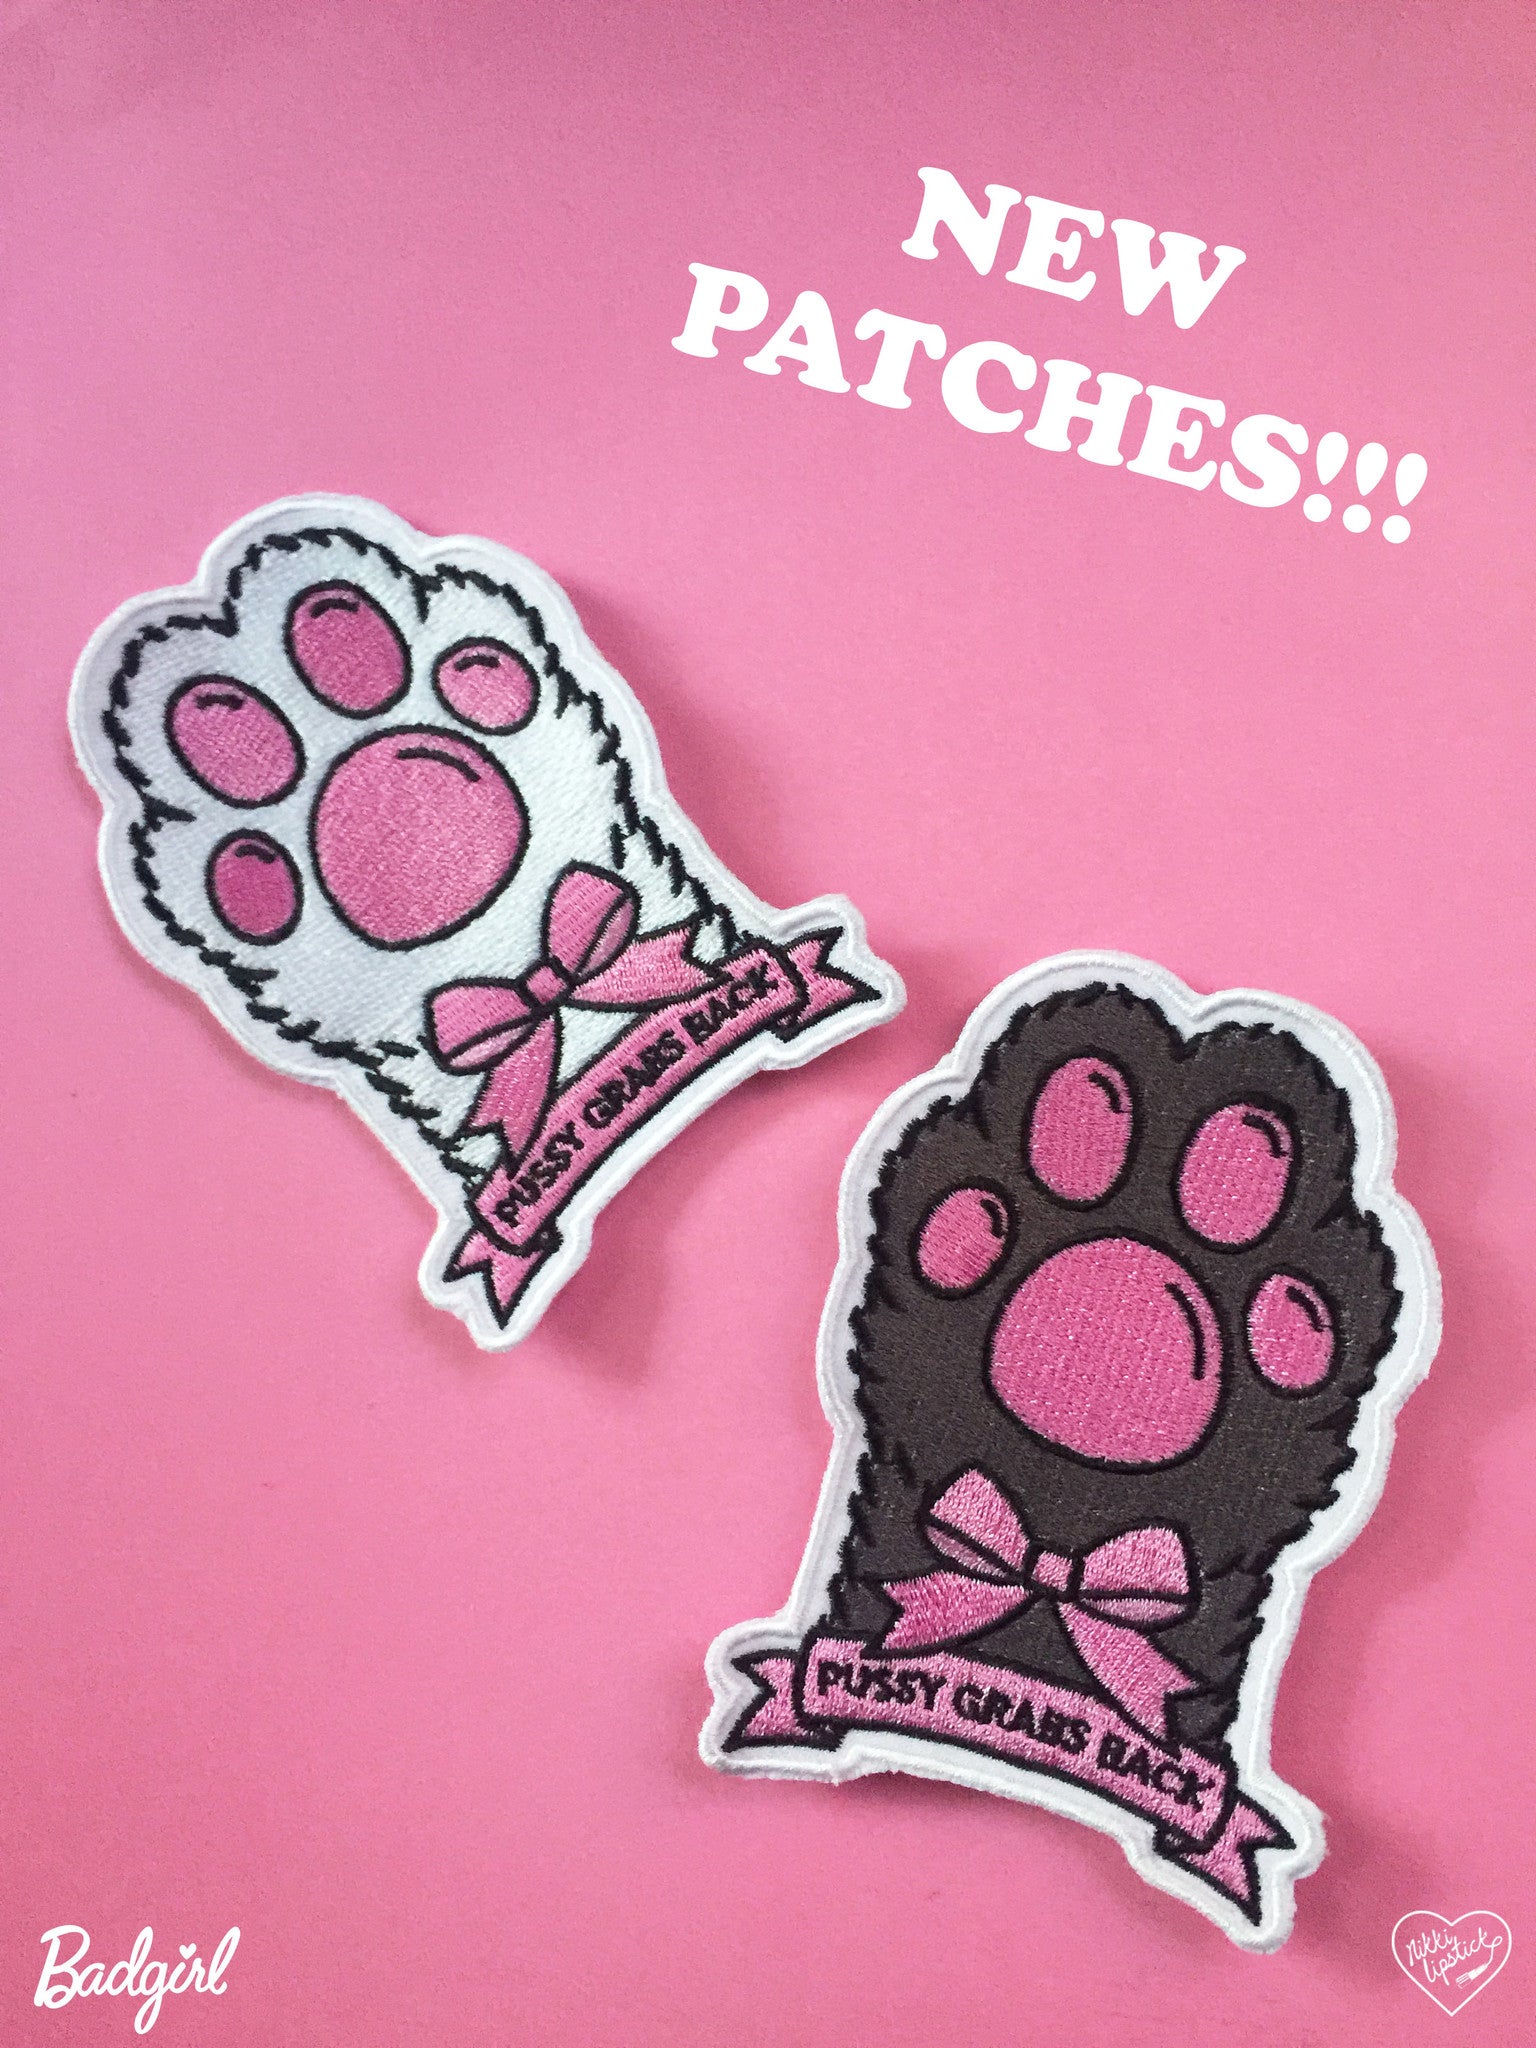 PUSSY GRABS BACK PATCHES